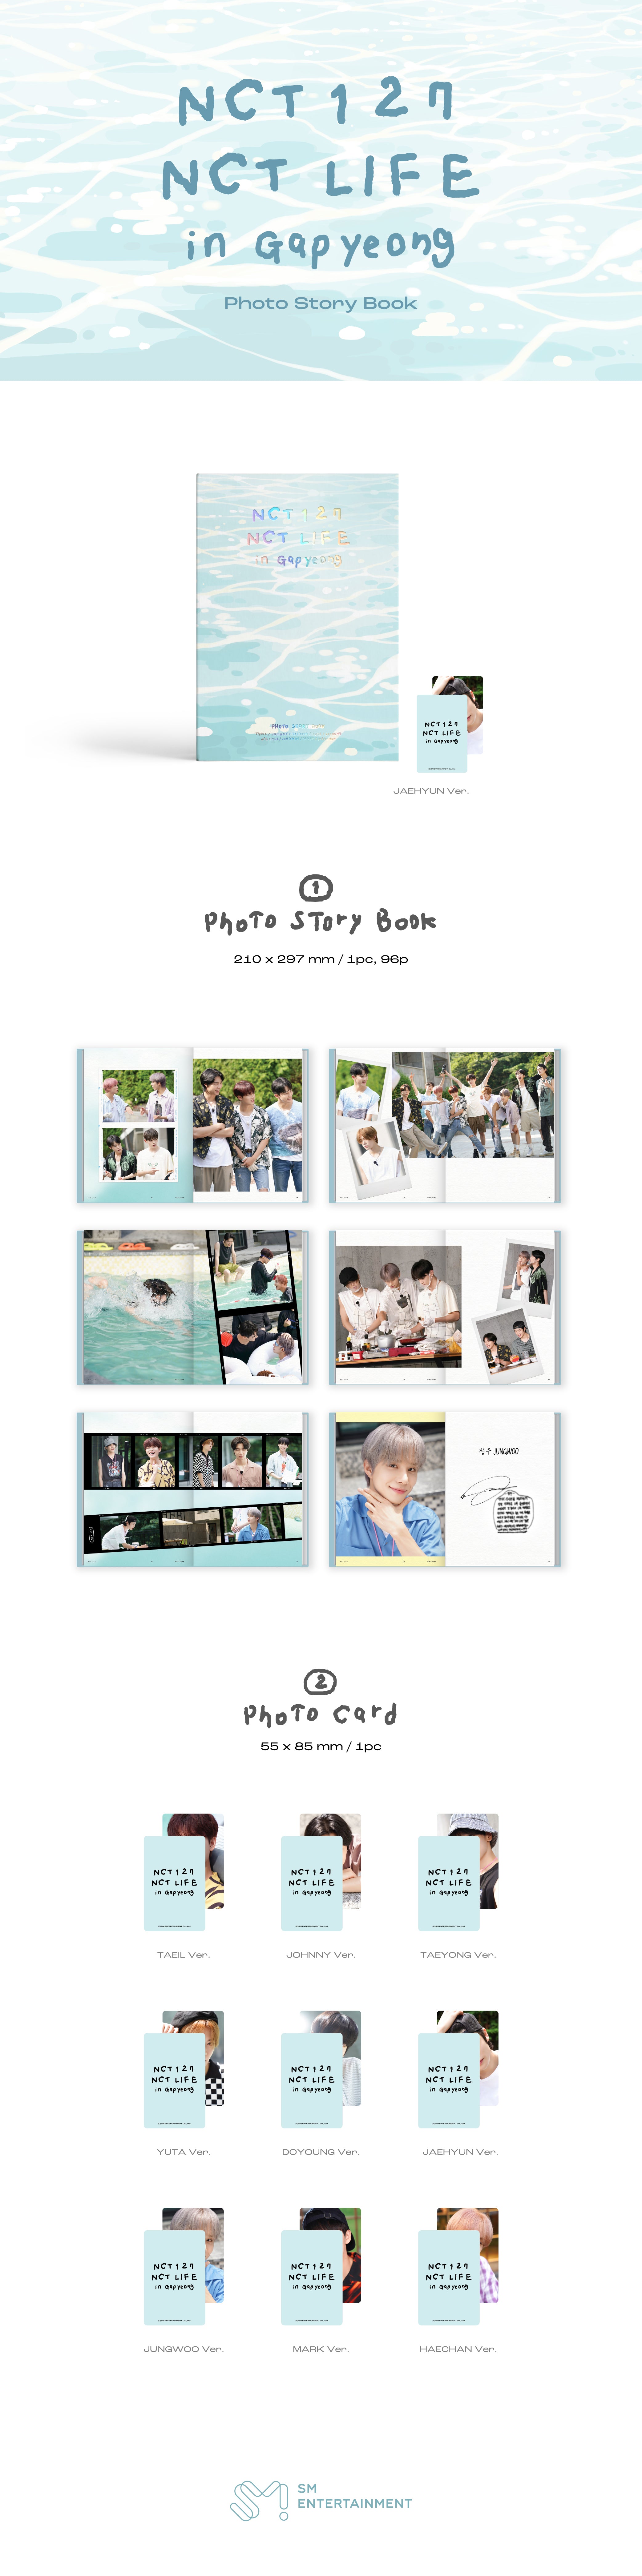 NCT 127 - NCT LIFE in Gapyeong (Photo Story Book)